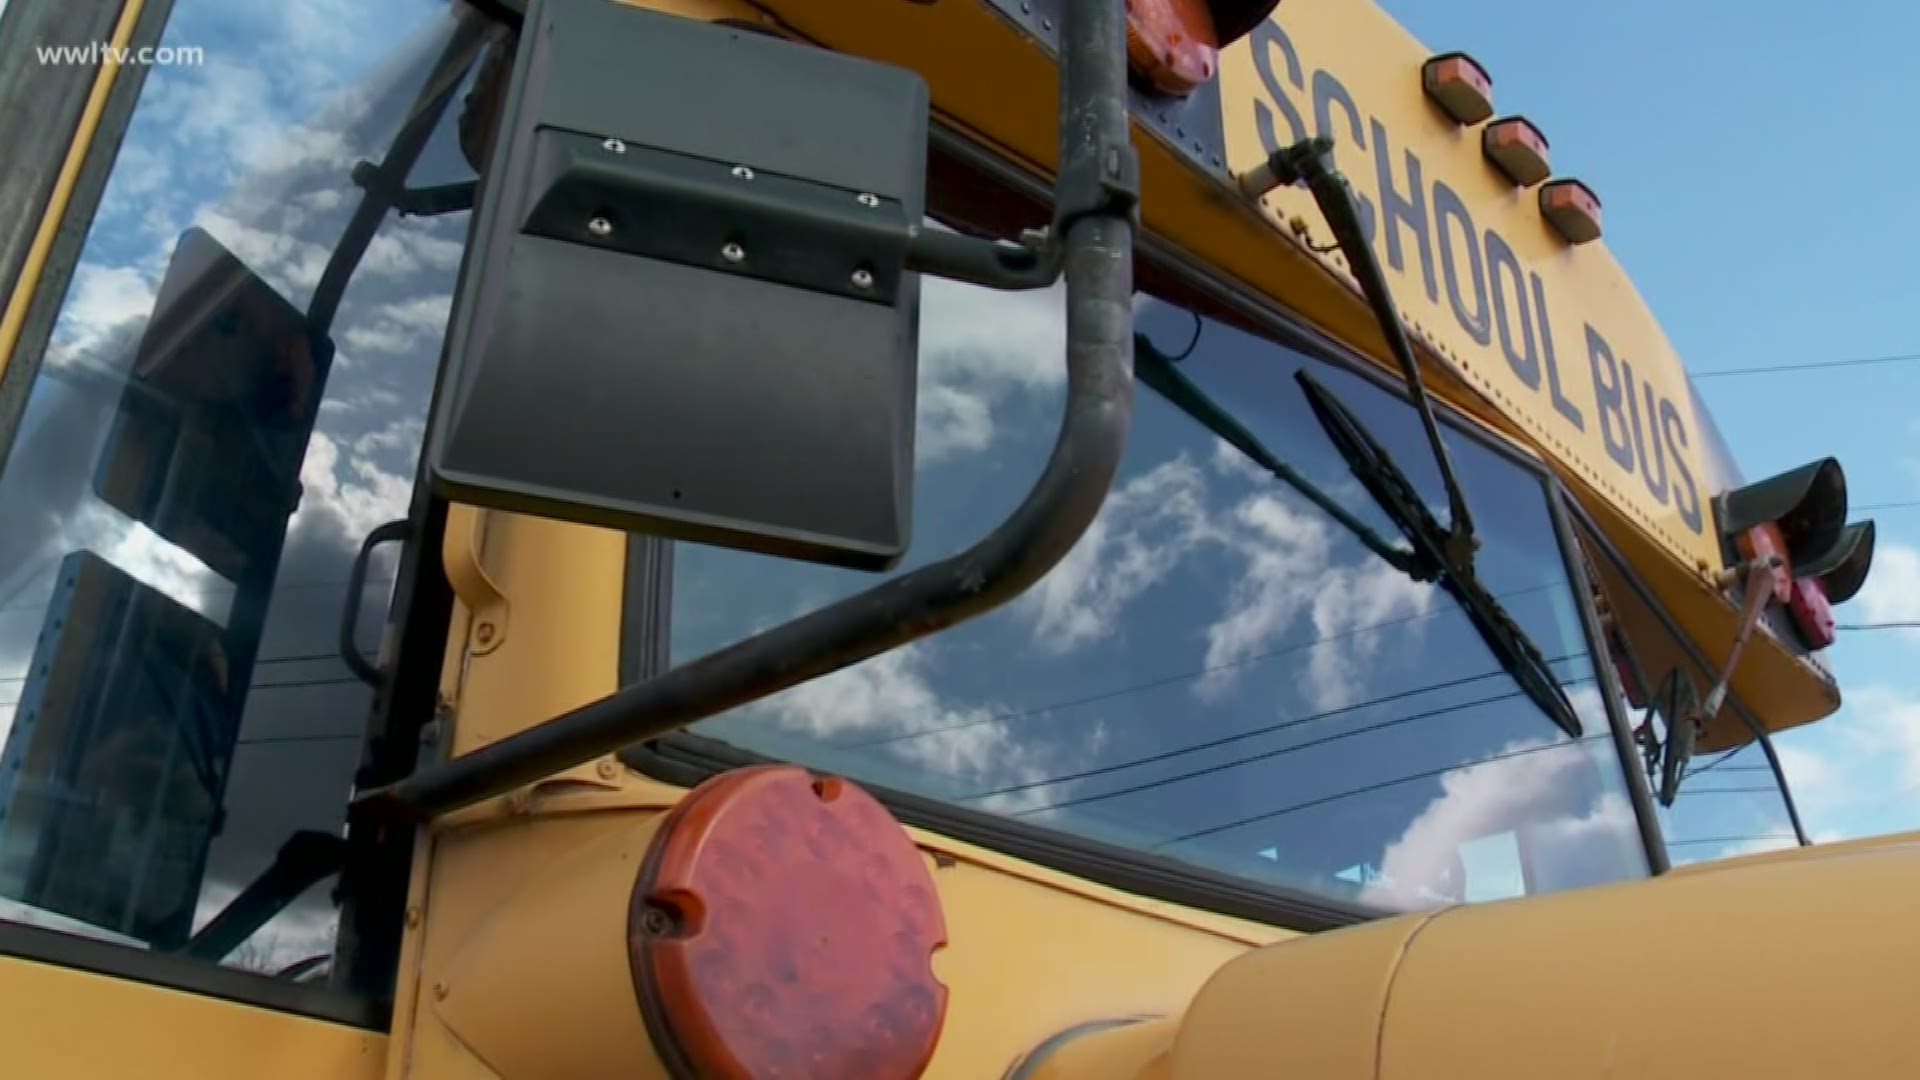 Bus companies told WWL-TV the city’s new permit requirements are hurting them disproportionately, squeezing them out in favor of larger national or regional firms.